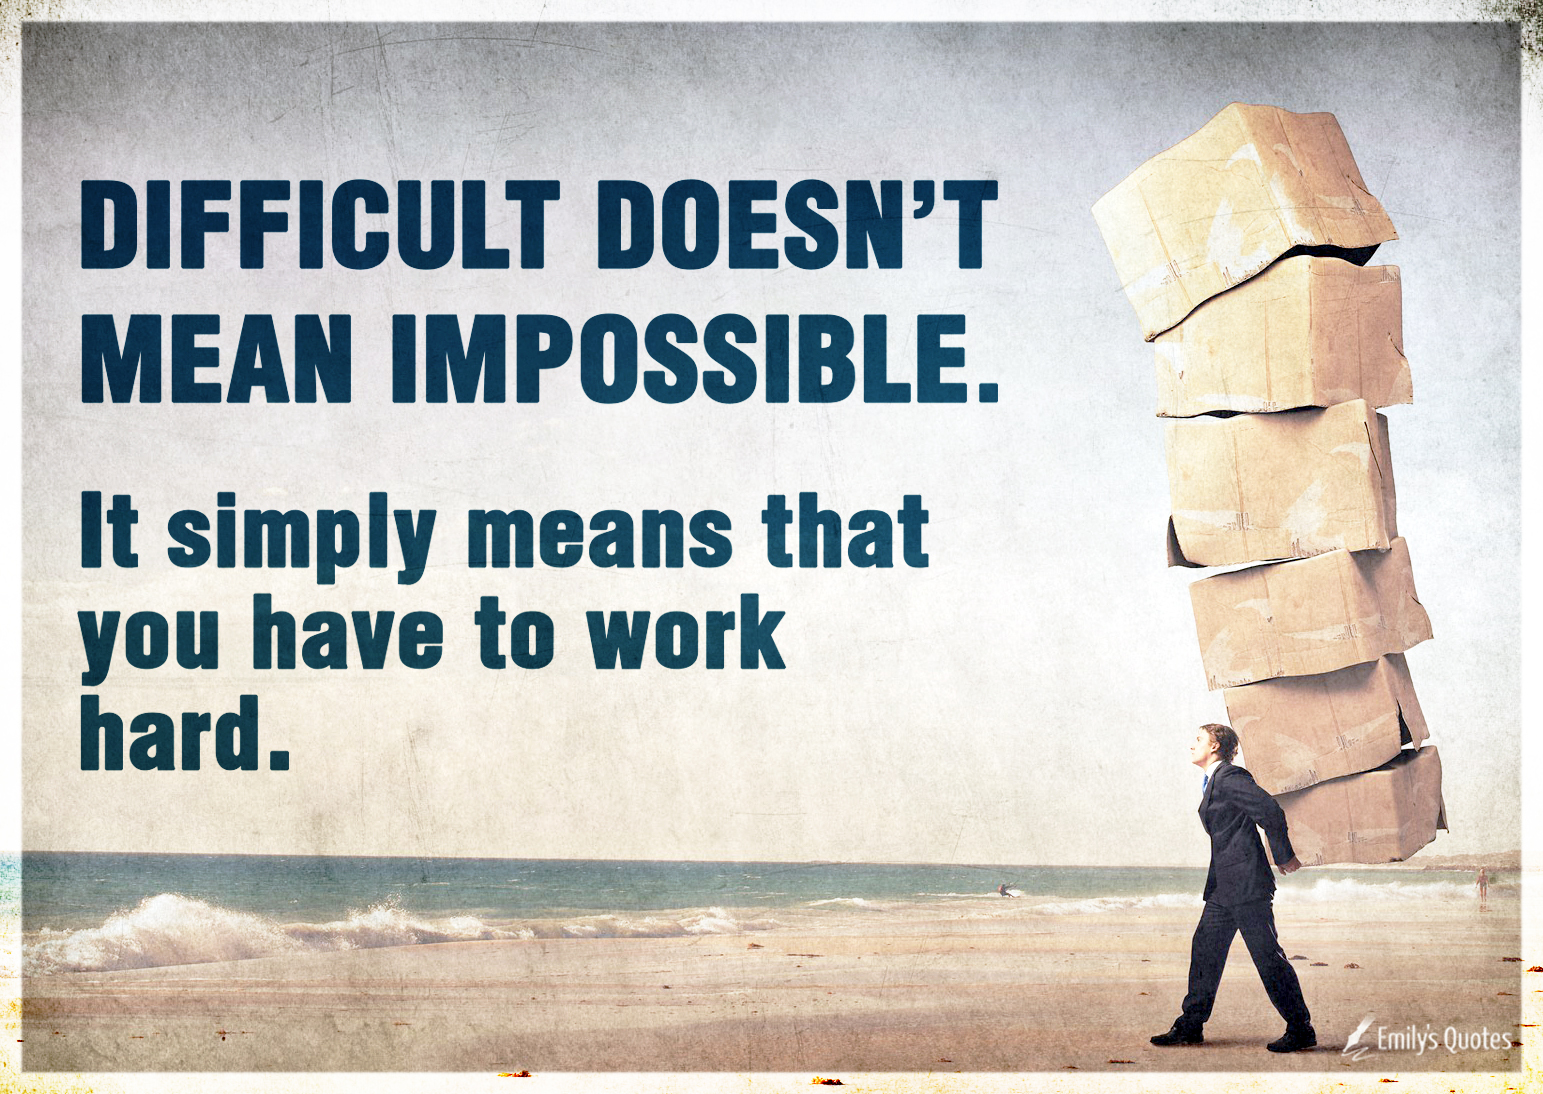 Difficult doesn’t mean impossible. It simply means that you have to work hard